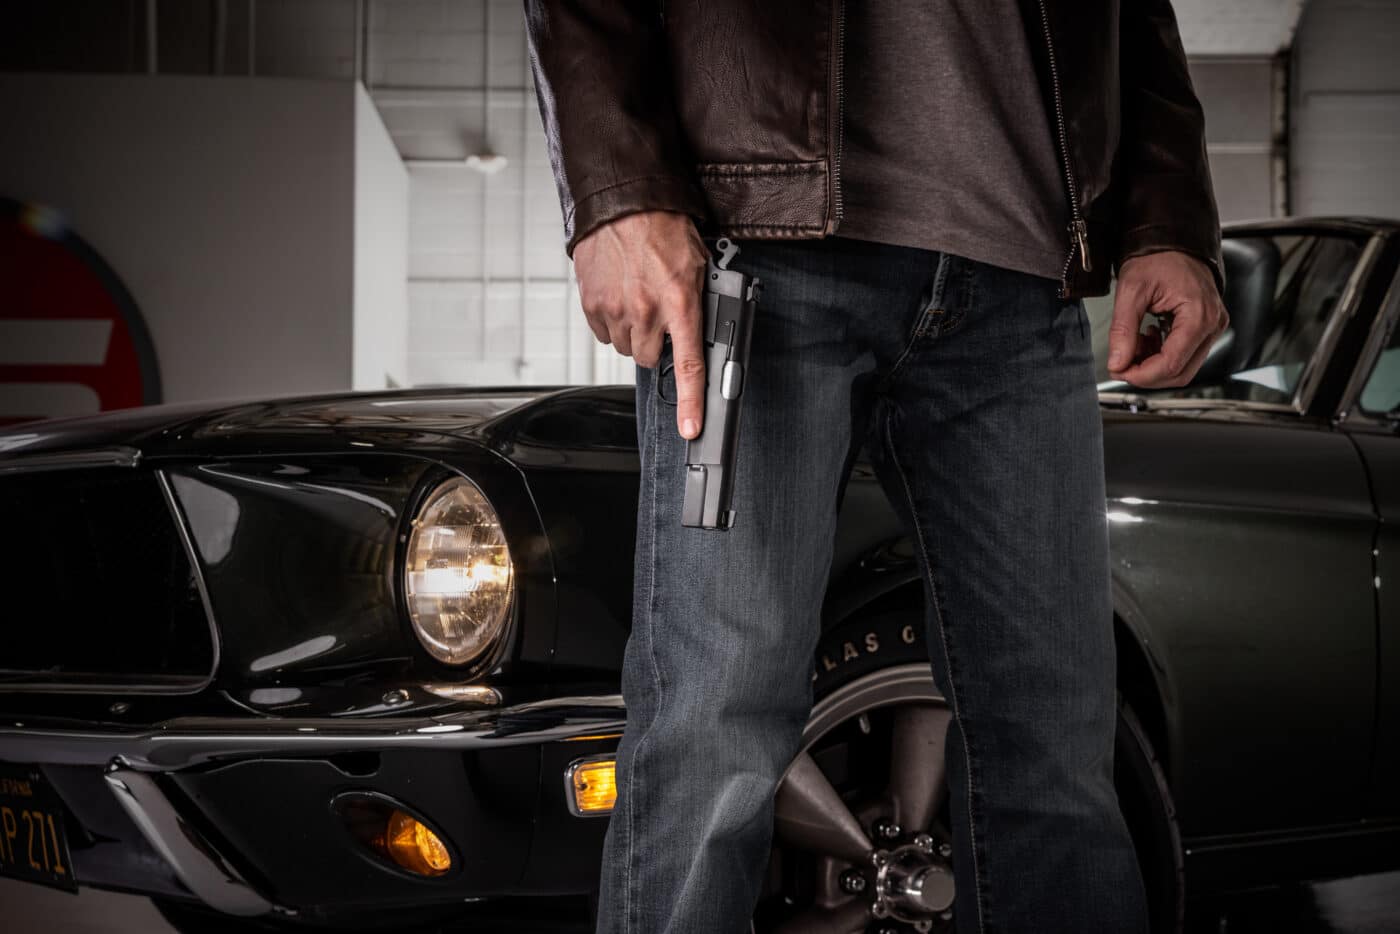 Man holding Springfield SA-35 pistol in front of a 1968 Ford Mustang